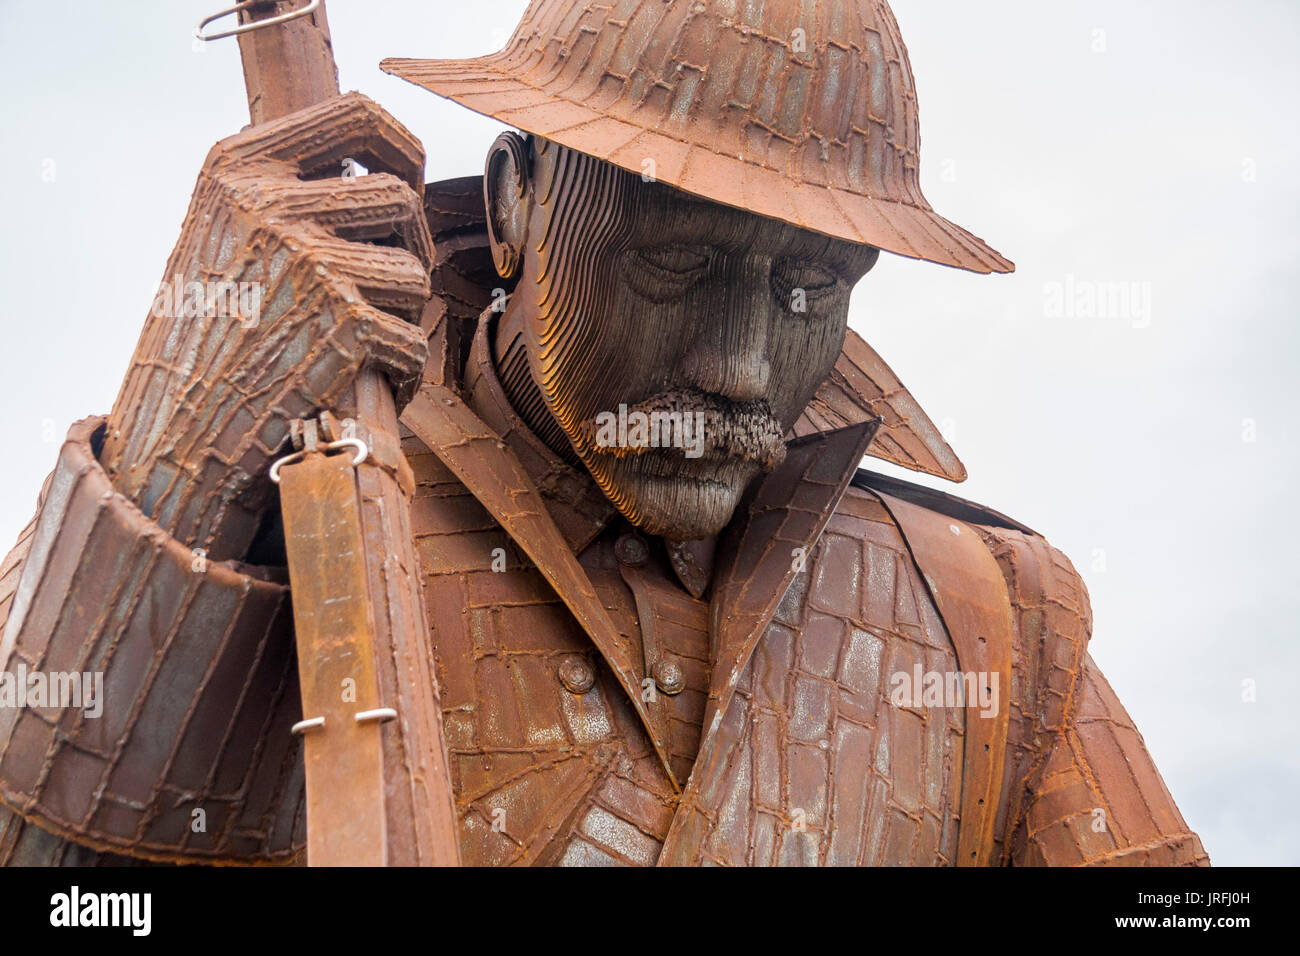 Close-up view of the memorial sculpture by artist Ray Lonsdale of a war weary soldier from WW1 named Tommy  at Seaham,Co.Durham Stock Photo